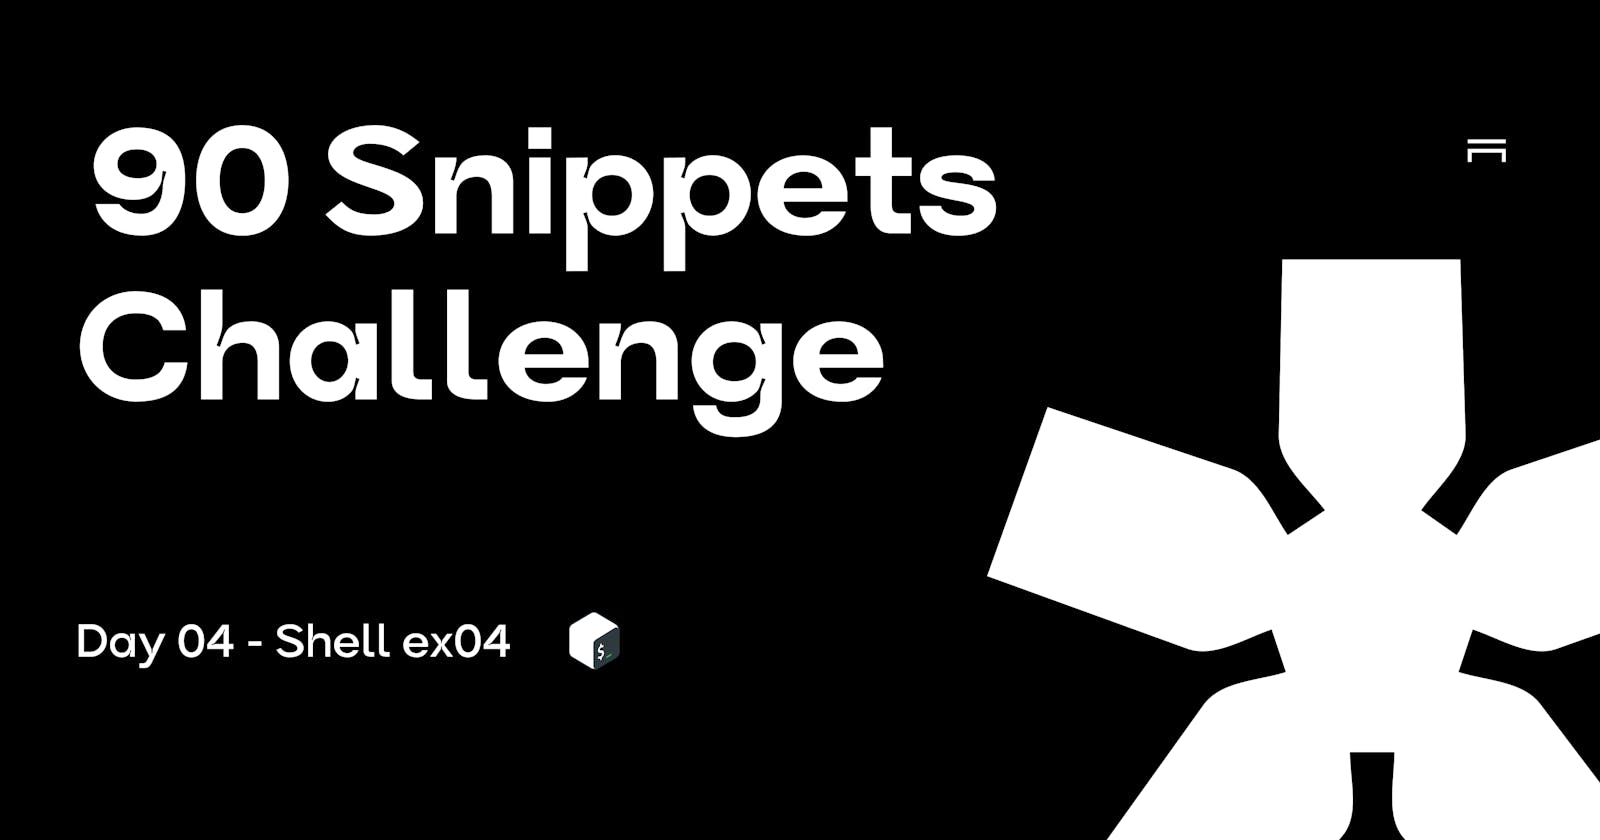 90 Snippets: The challenge is going crazy 🤯